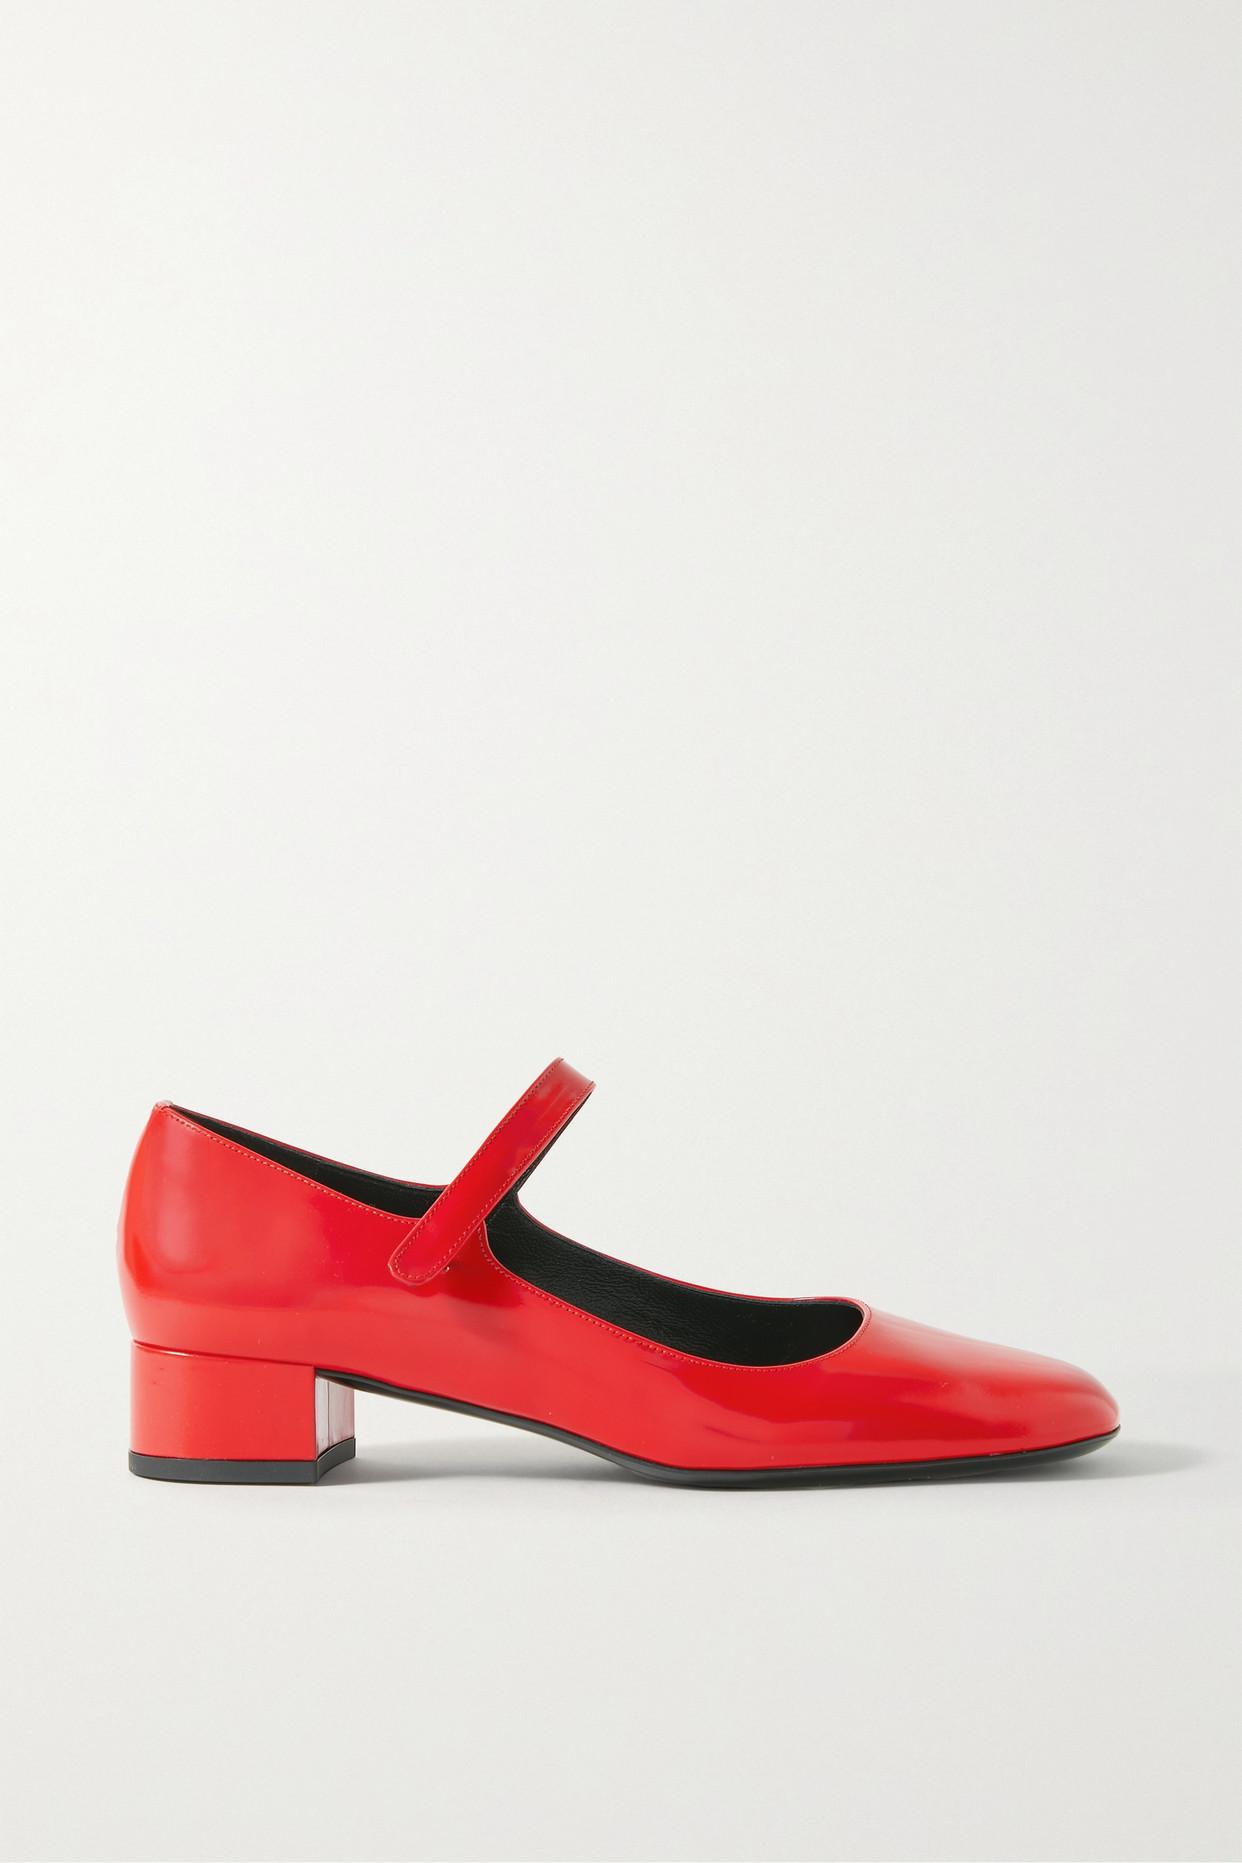 BY FAR Ginny Patent-leather Mary Jane Pumps in Red | Lyst